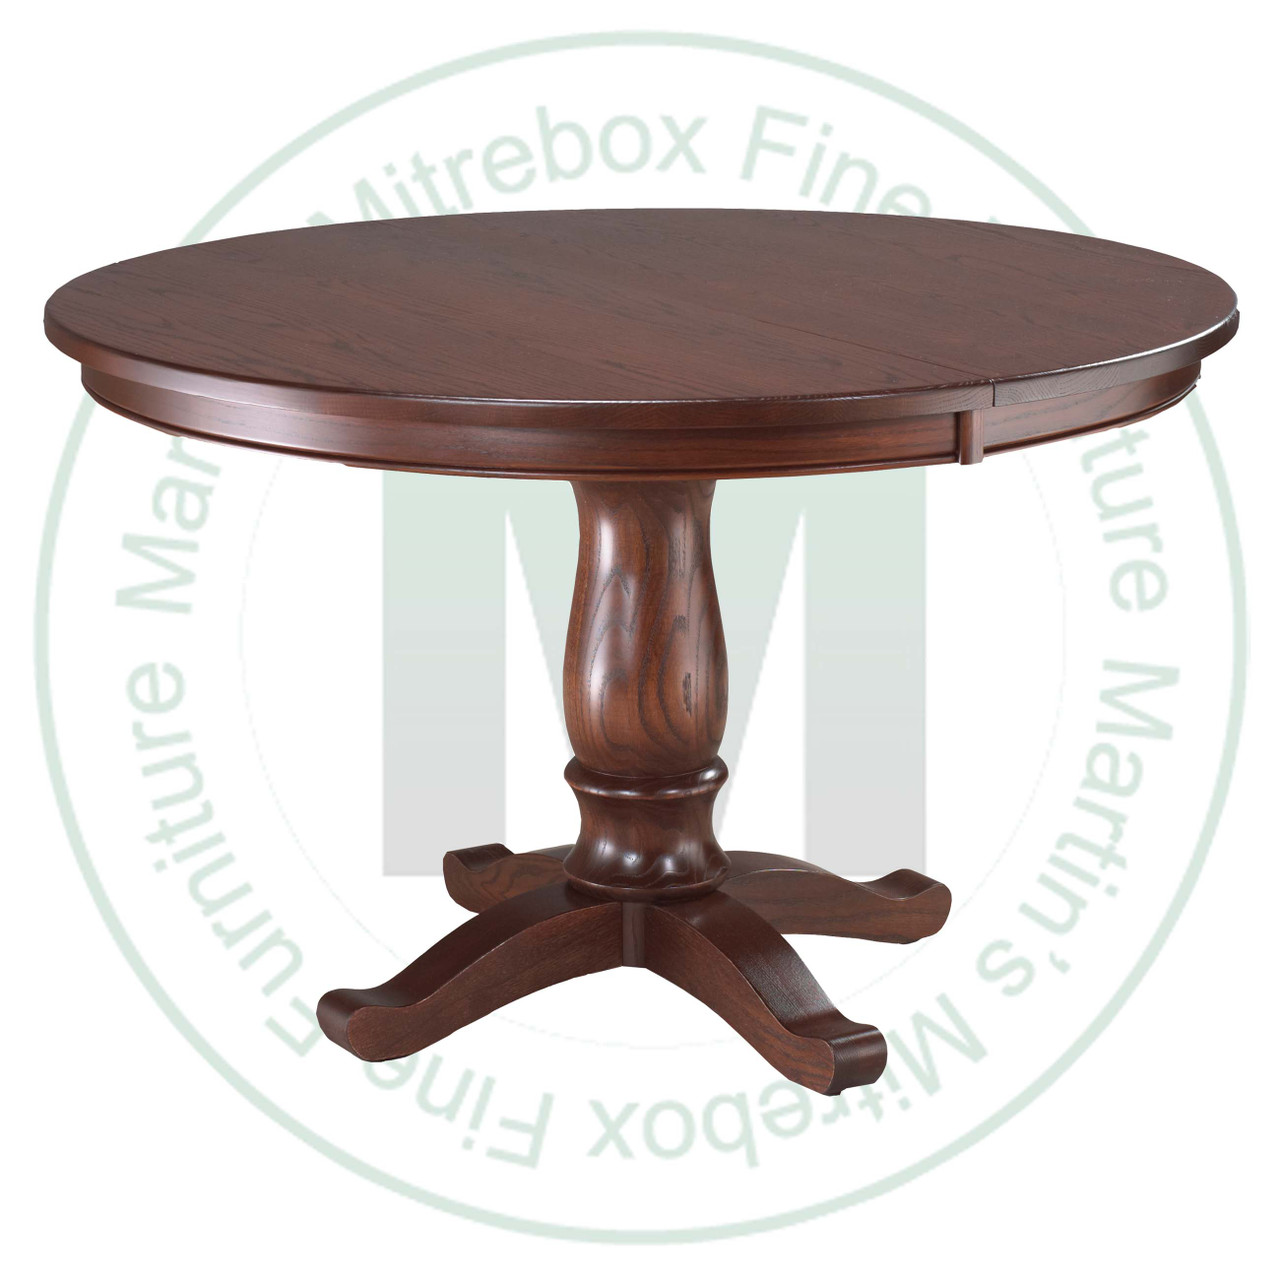 Wormy Maple Kimberly Crest Single Pedestal Table 36''D x 42''W x 30''H With 1 - 12'' Leaf Table